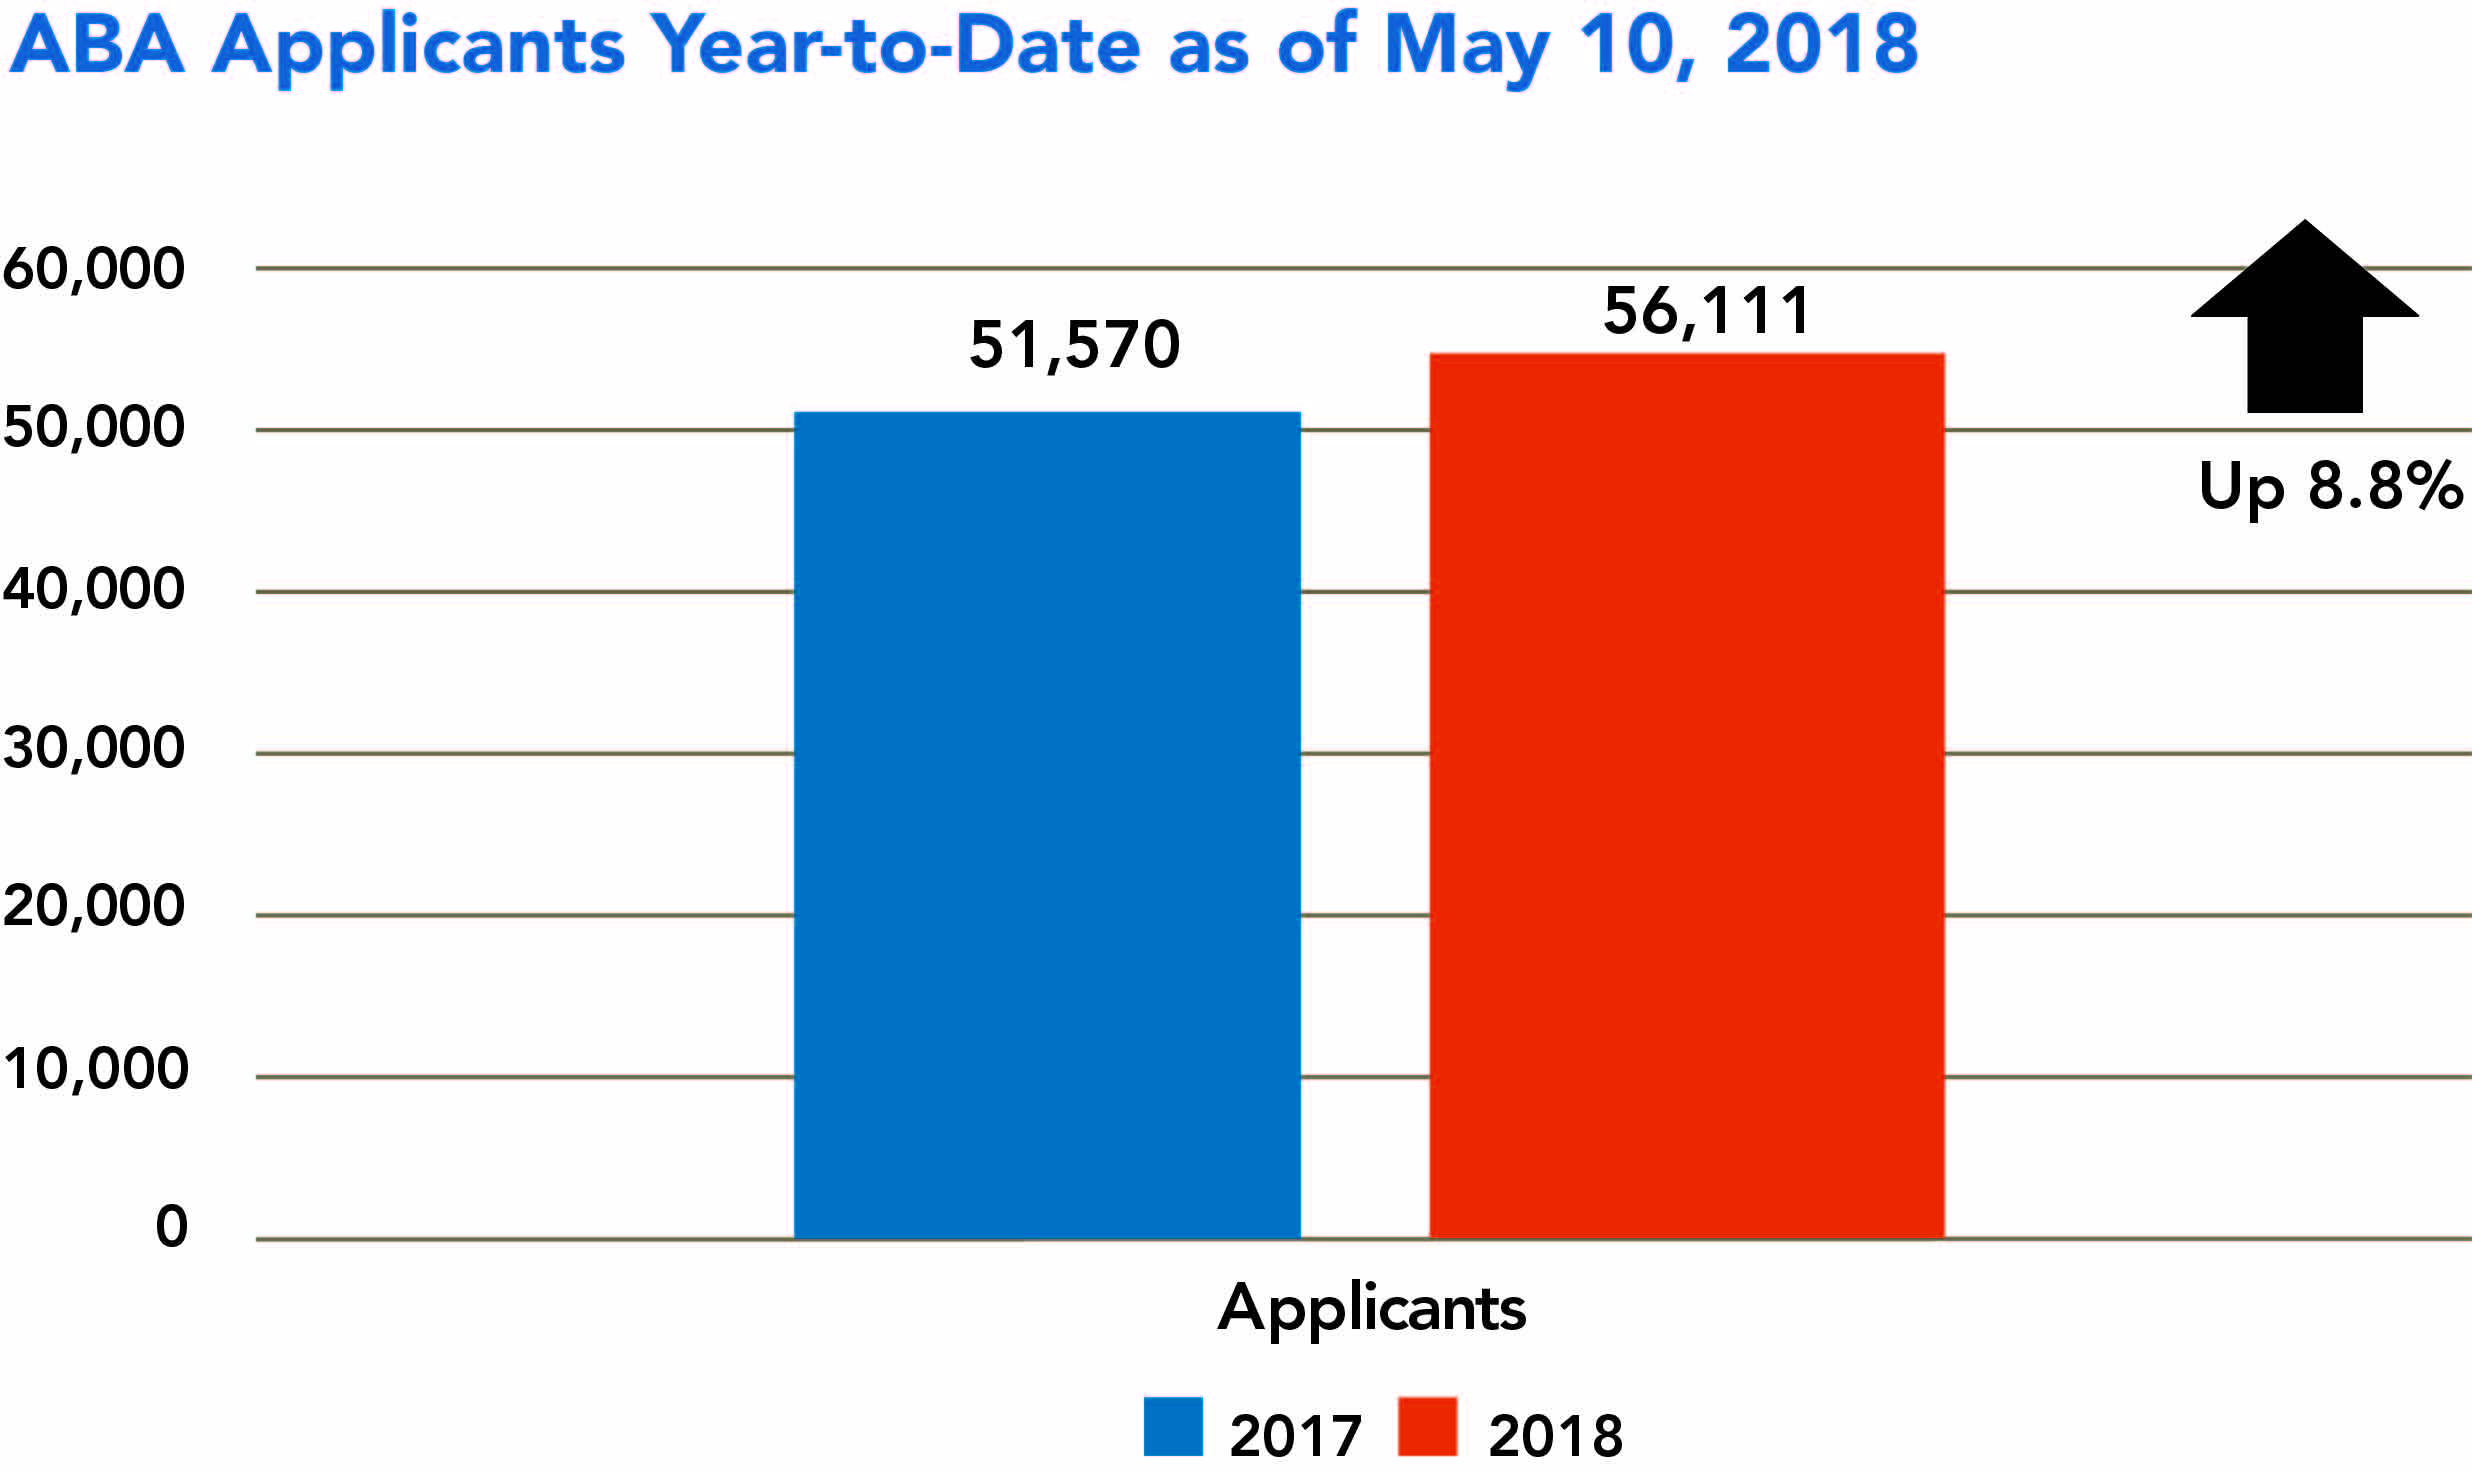 As of 5/10/18, there are 369,622 applications submitted by 56,111 applicants for the 2018–2019 academic year. Applicants are up 8.8% and applications are up 9.2% from 2017–2018.